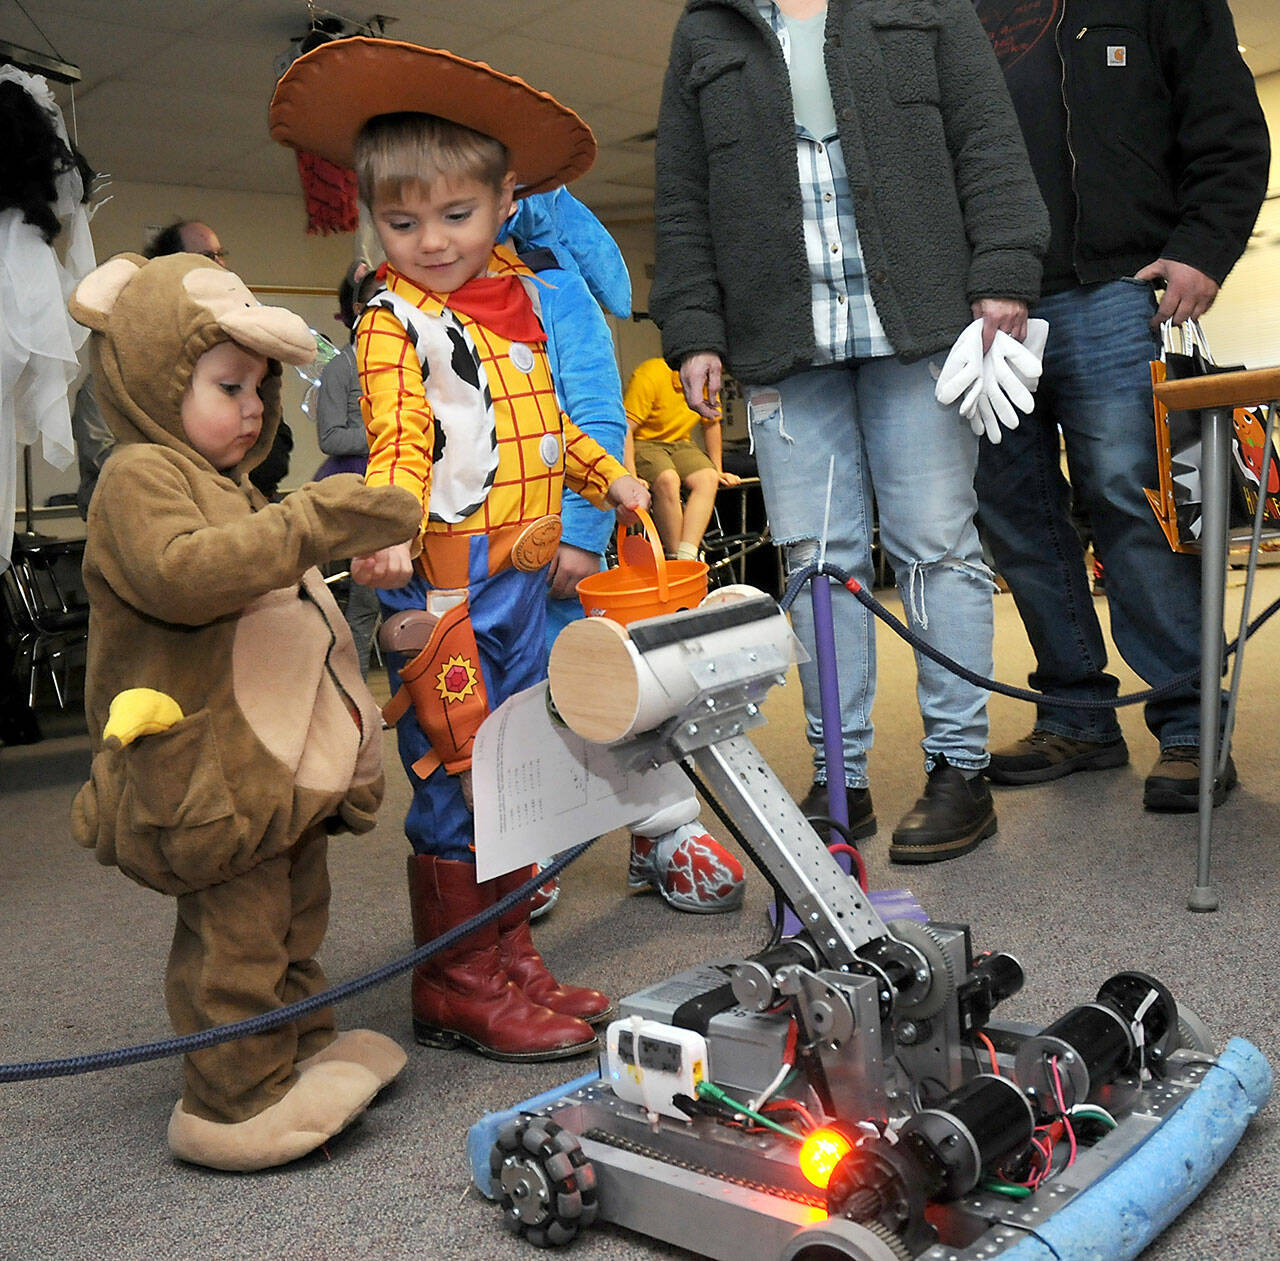 Sequim siblings Jaxson Kober, 2, and Micah Brooks, 4, receive candy offered by a robot created by students in the Sequim High School robotics program during Haunted Hallways on Saturday at the school. Haunted Hallways featured a portion of the school set aside for a variety of Halloween games and attractions hosted by students as a benefit for the Sequim Food Bank. (Keith Thorpe/Peninsula Daily News)